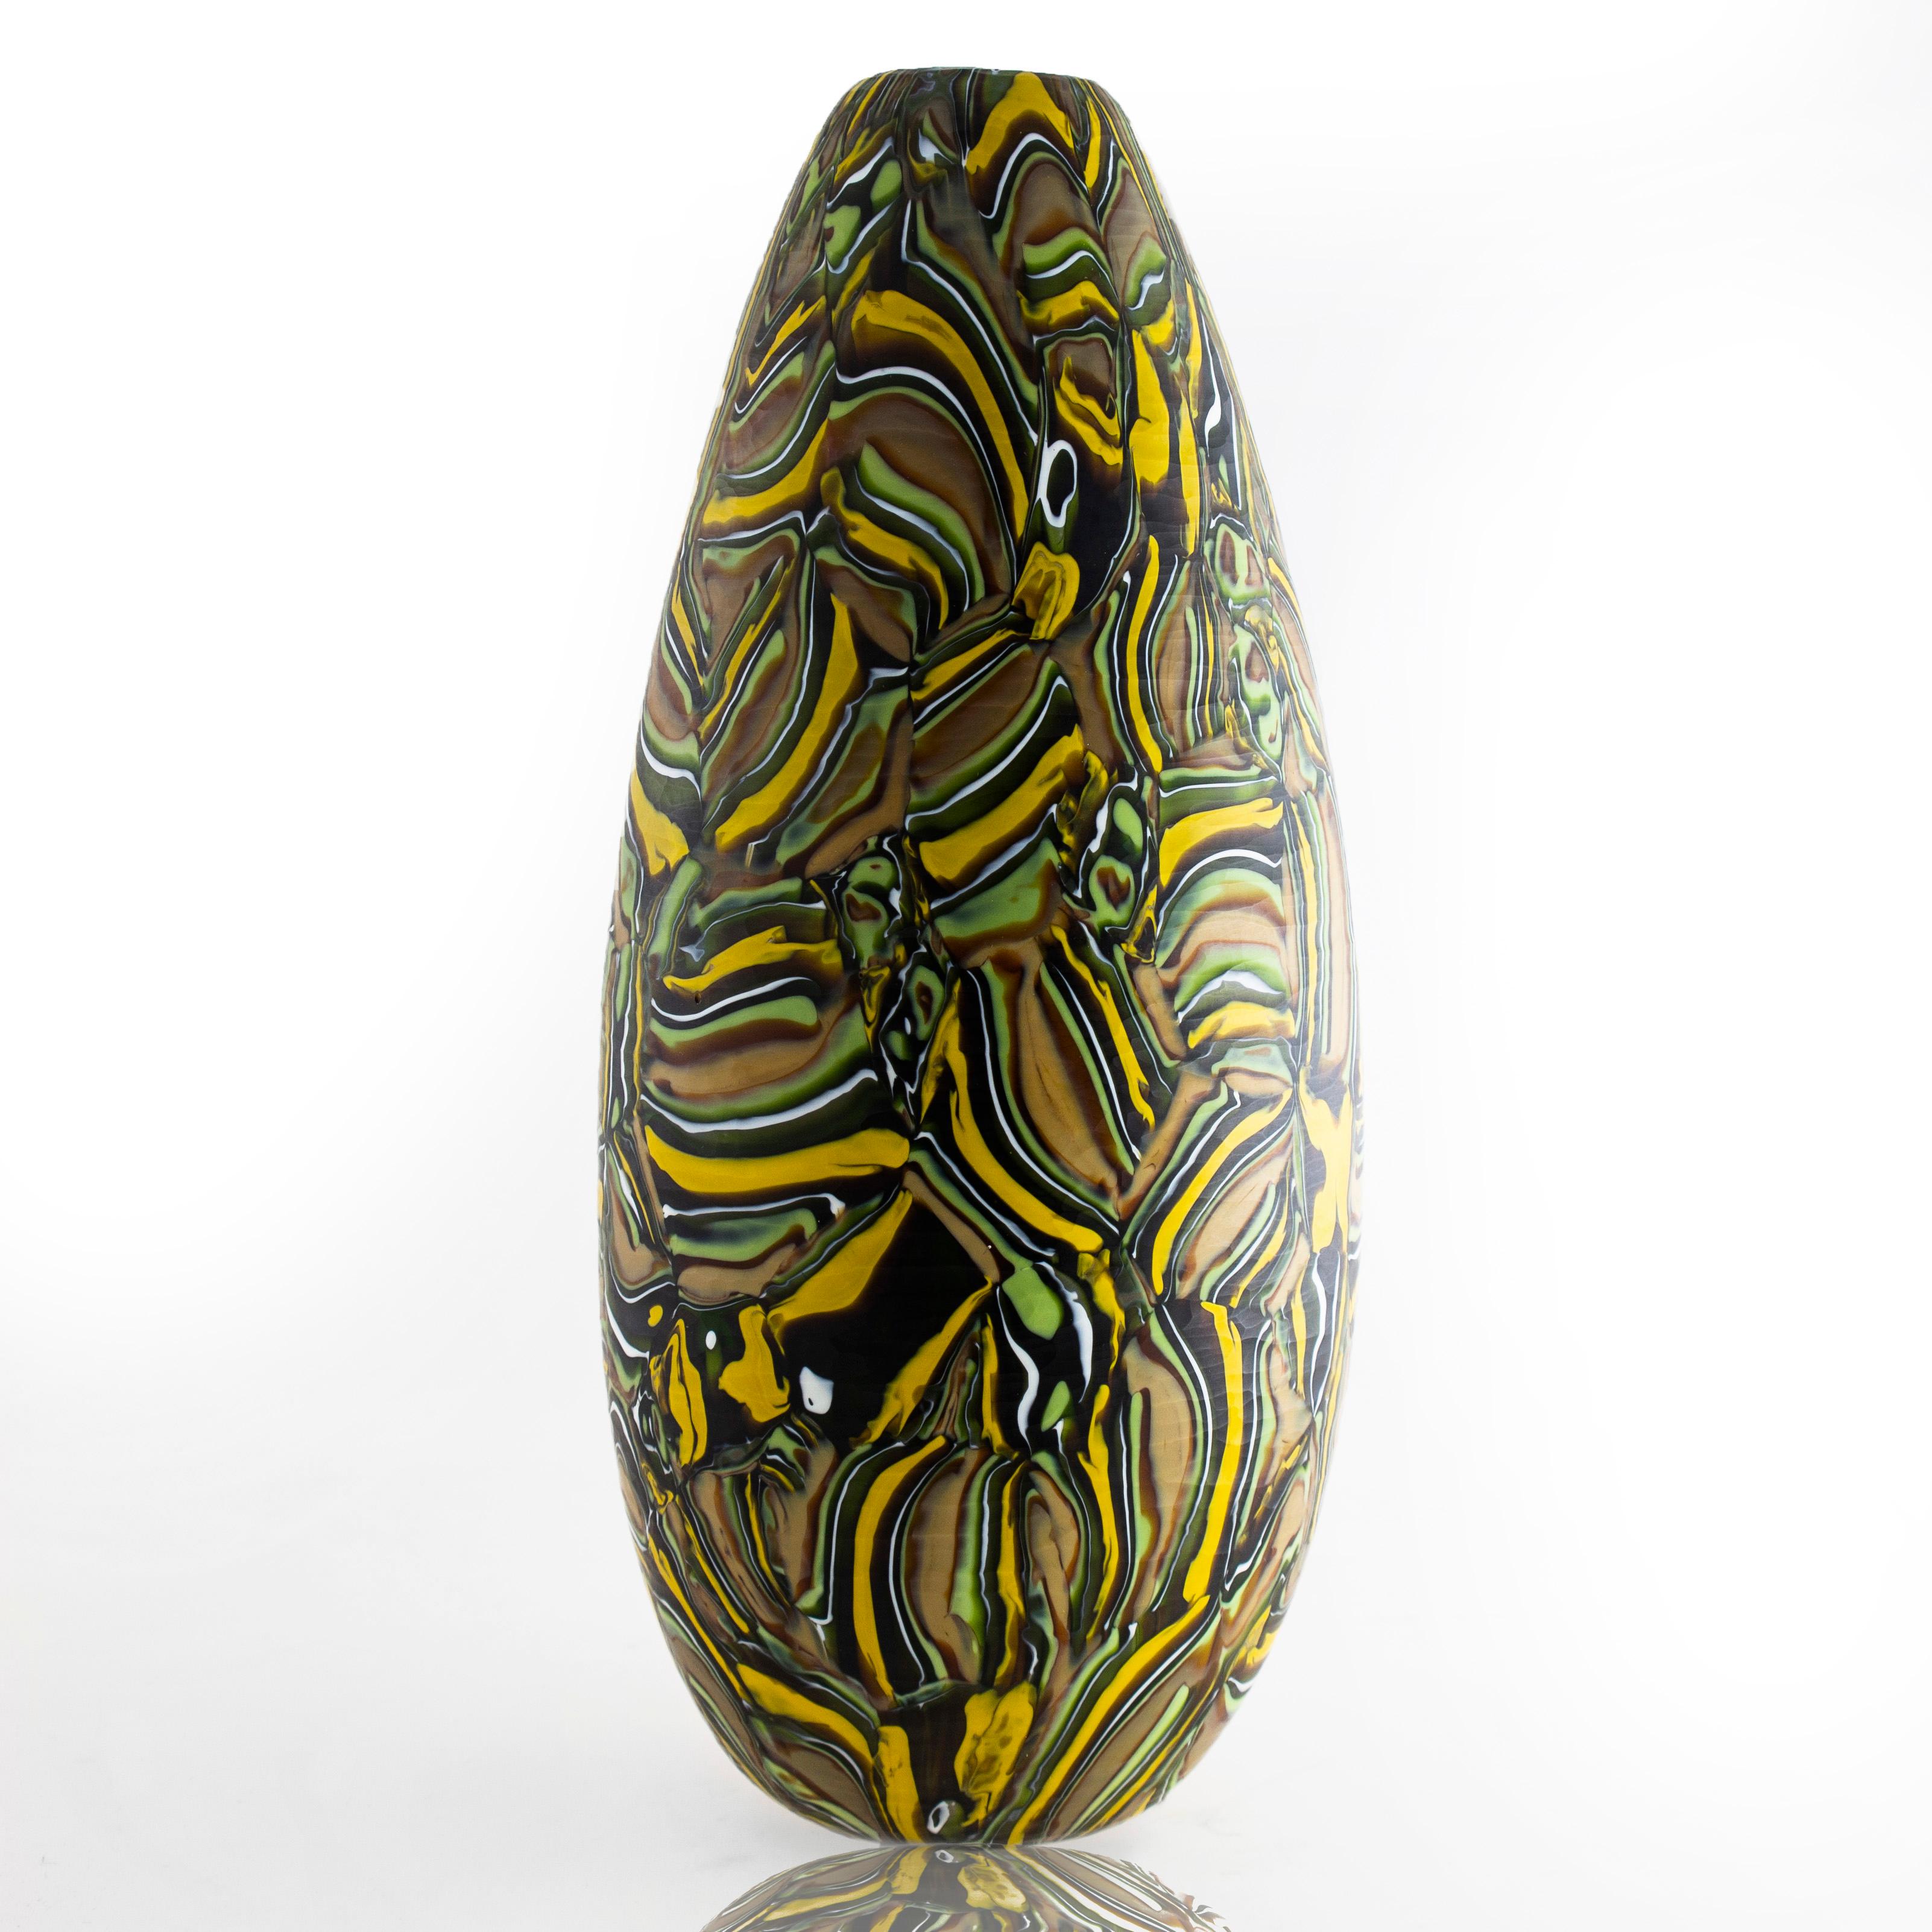 Art glass vase • Handblown by Siemon & Salazar

Velato Strata Murrine mustard/olive tall egg vase
These intensely patterned pieces of art are collections of folded strata murrine that are fused together to create a larger whole. Configurations of